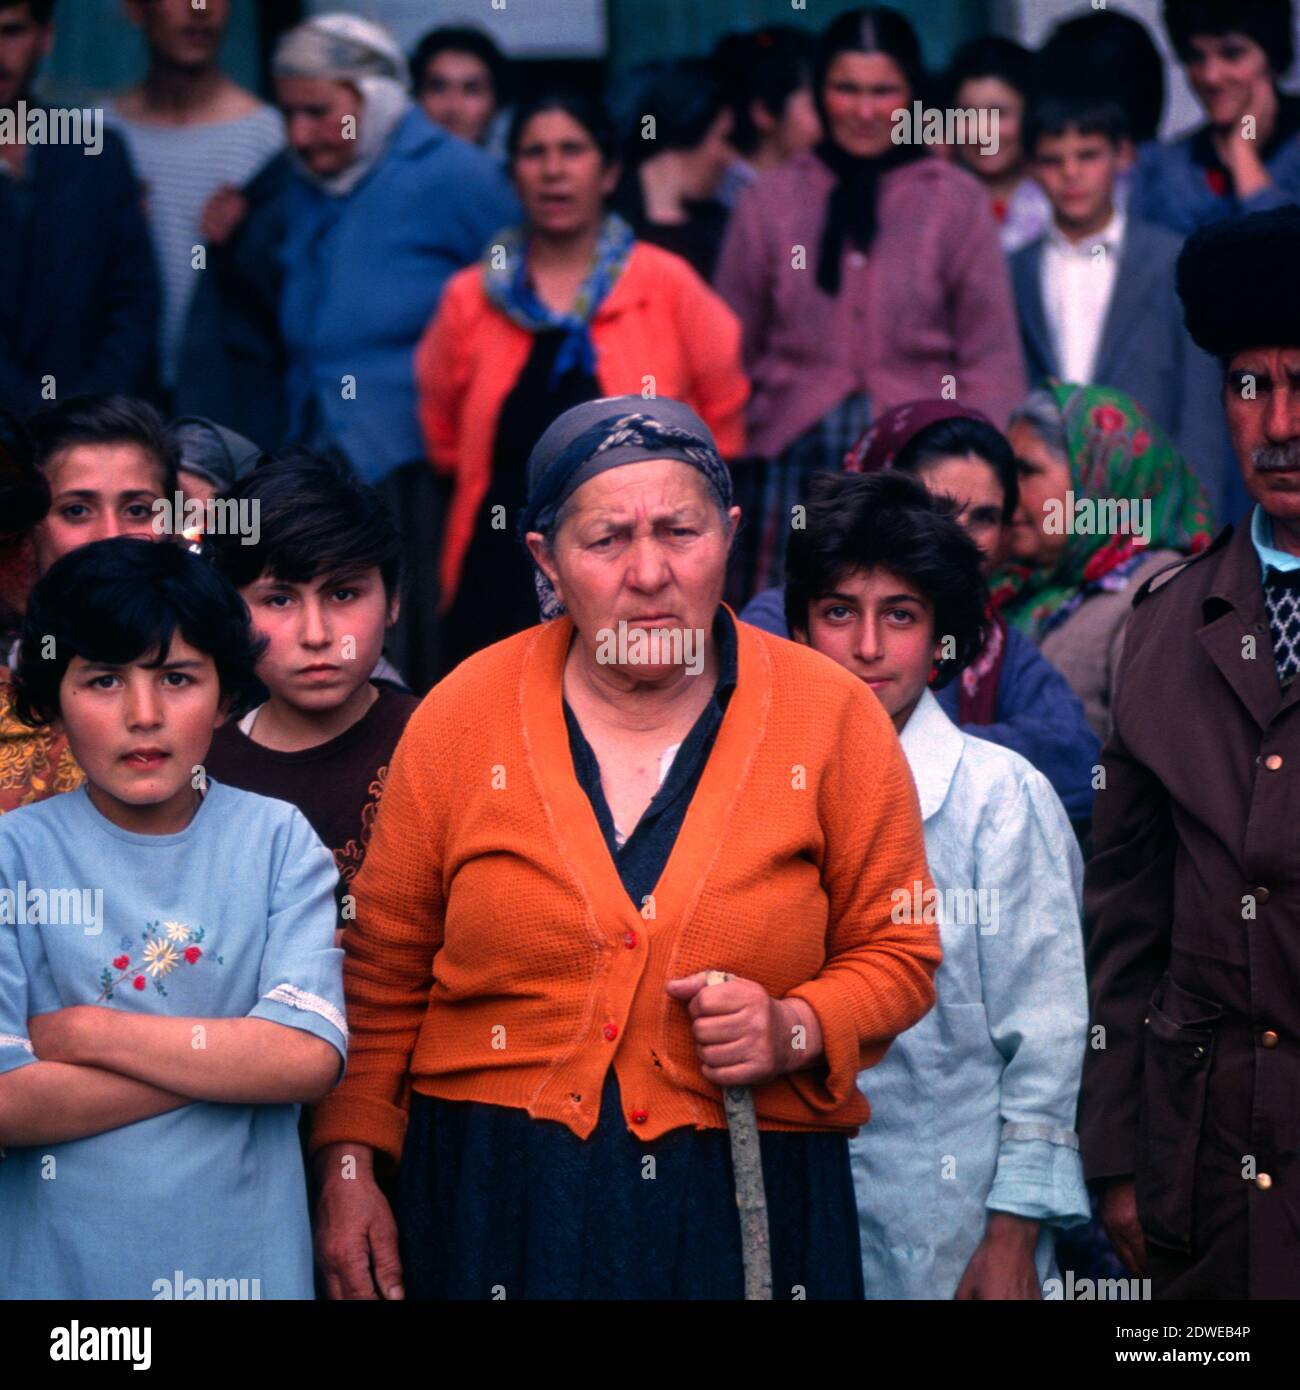 File Photo taken 10/04/1993: Azerbaijani refugees, Internally Displaced Persons or IDP, from Fizuli living in a school in Akhmedbeili on the Araz River in southeastern Azerbaijan near the Azerbaijan Iran border. Stock Photo